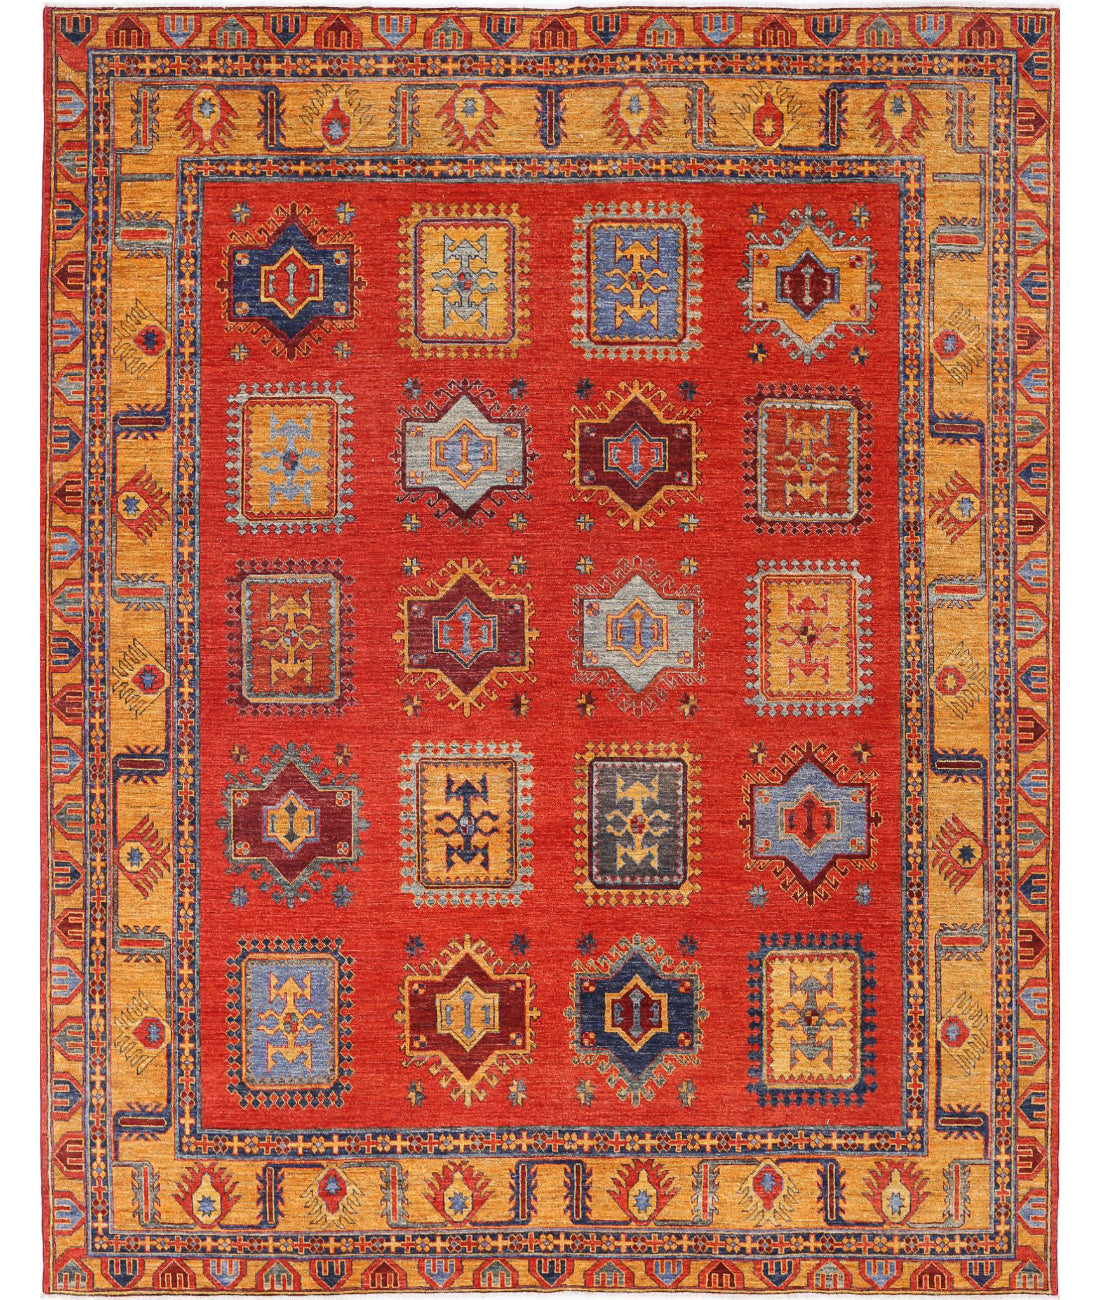 Hand Knotted Nomadic Caucasian Humna Wool Rug - 8'8'' x 12'2'' 8'8'' x 12'2'' (260 X 365) / Red / Gold